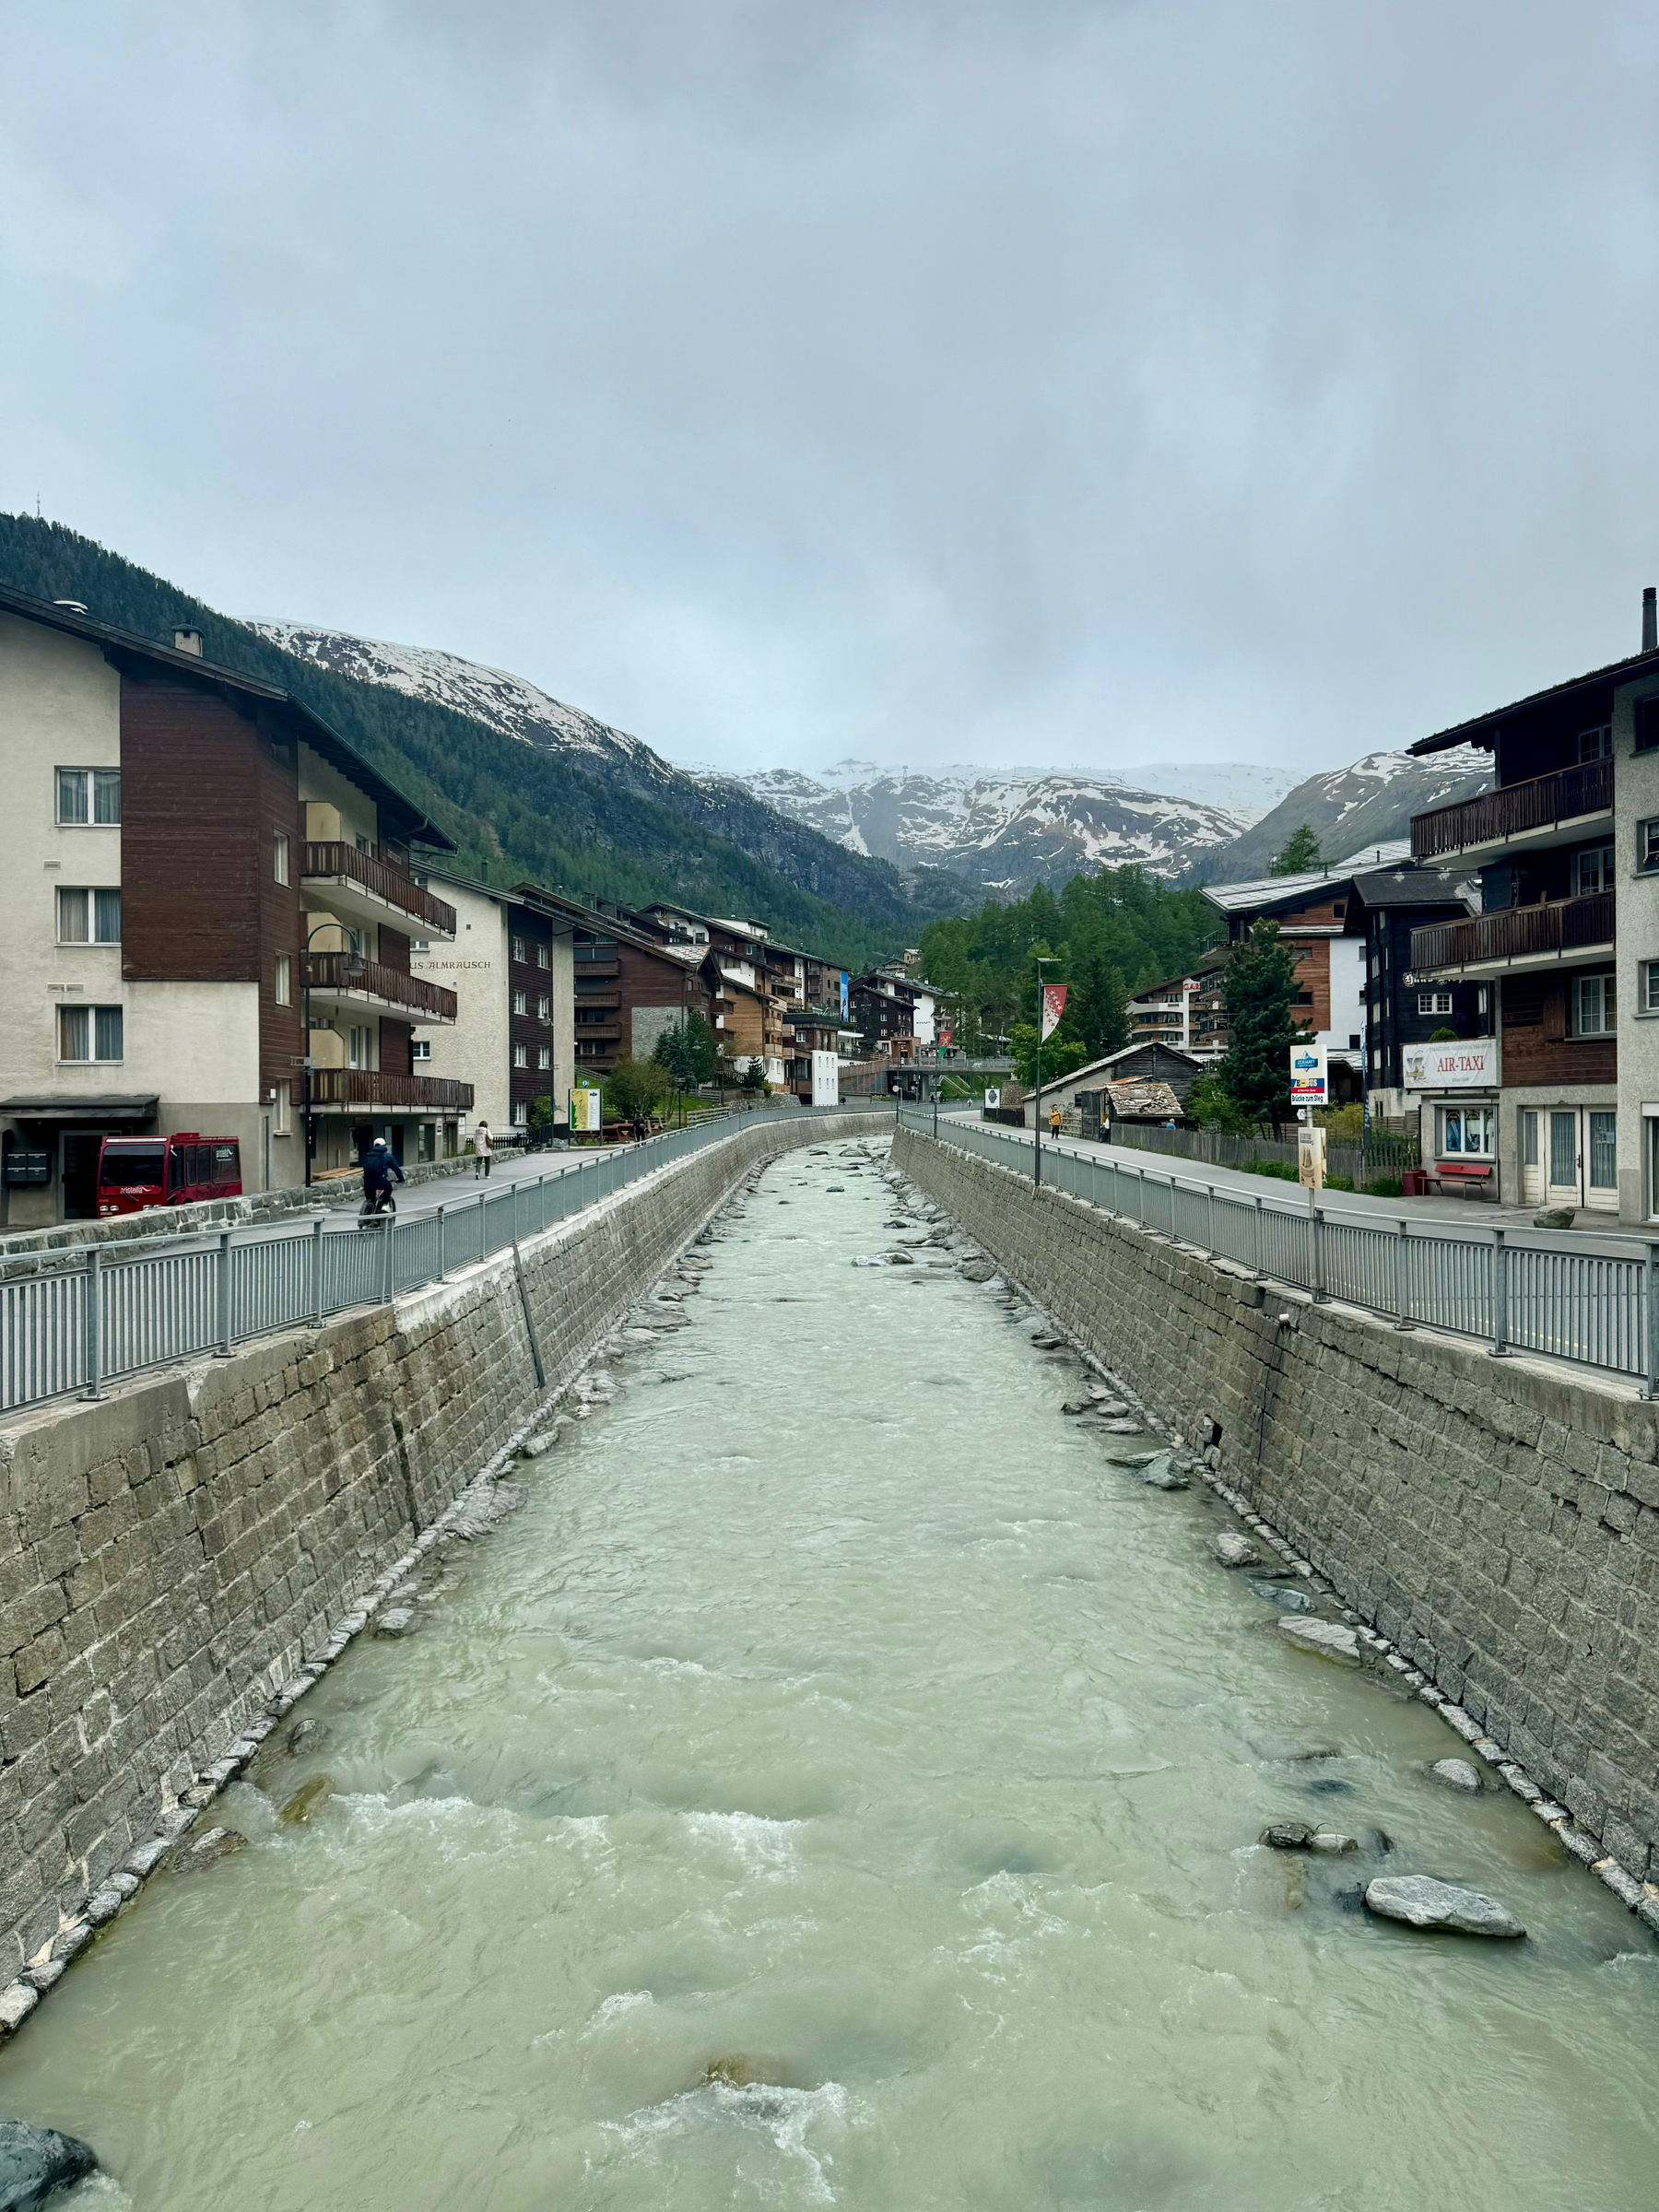 A river flowing through a channel in a mountain town with buildings on either side and snow-capped mountains in the background under a cloudy sky.